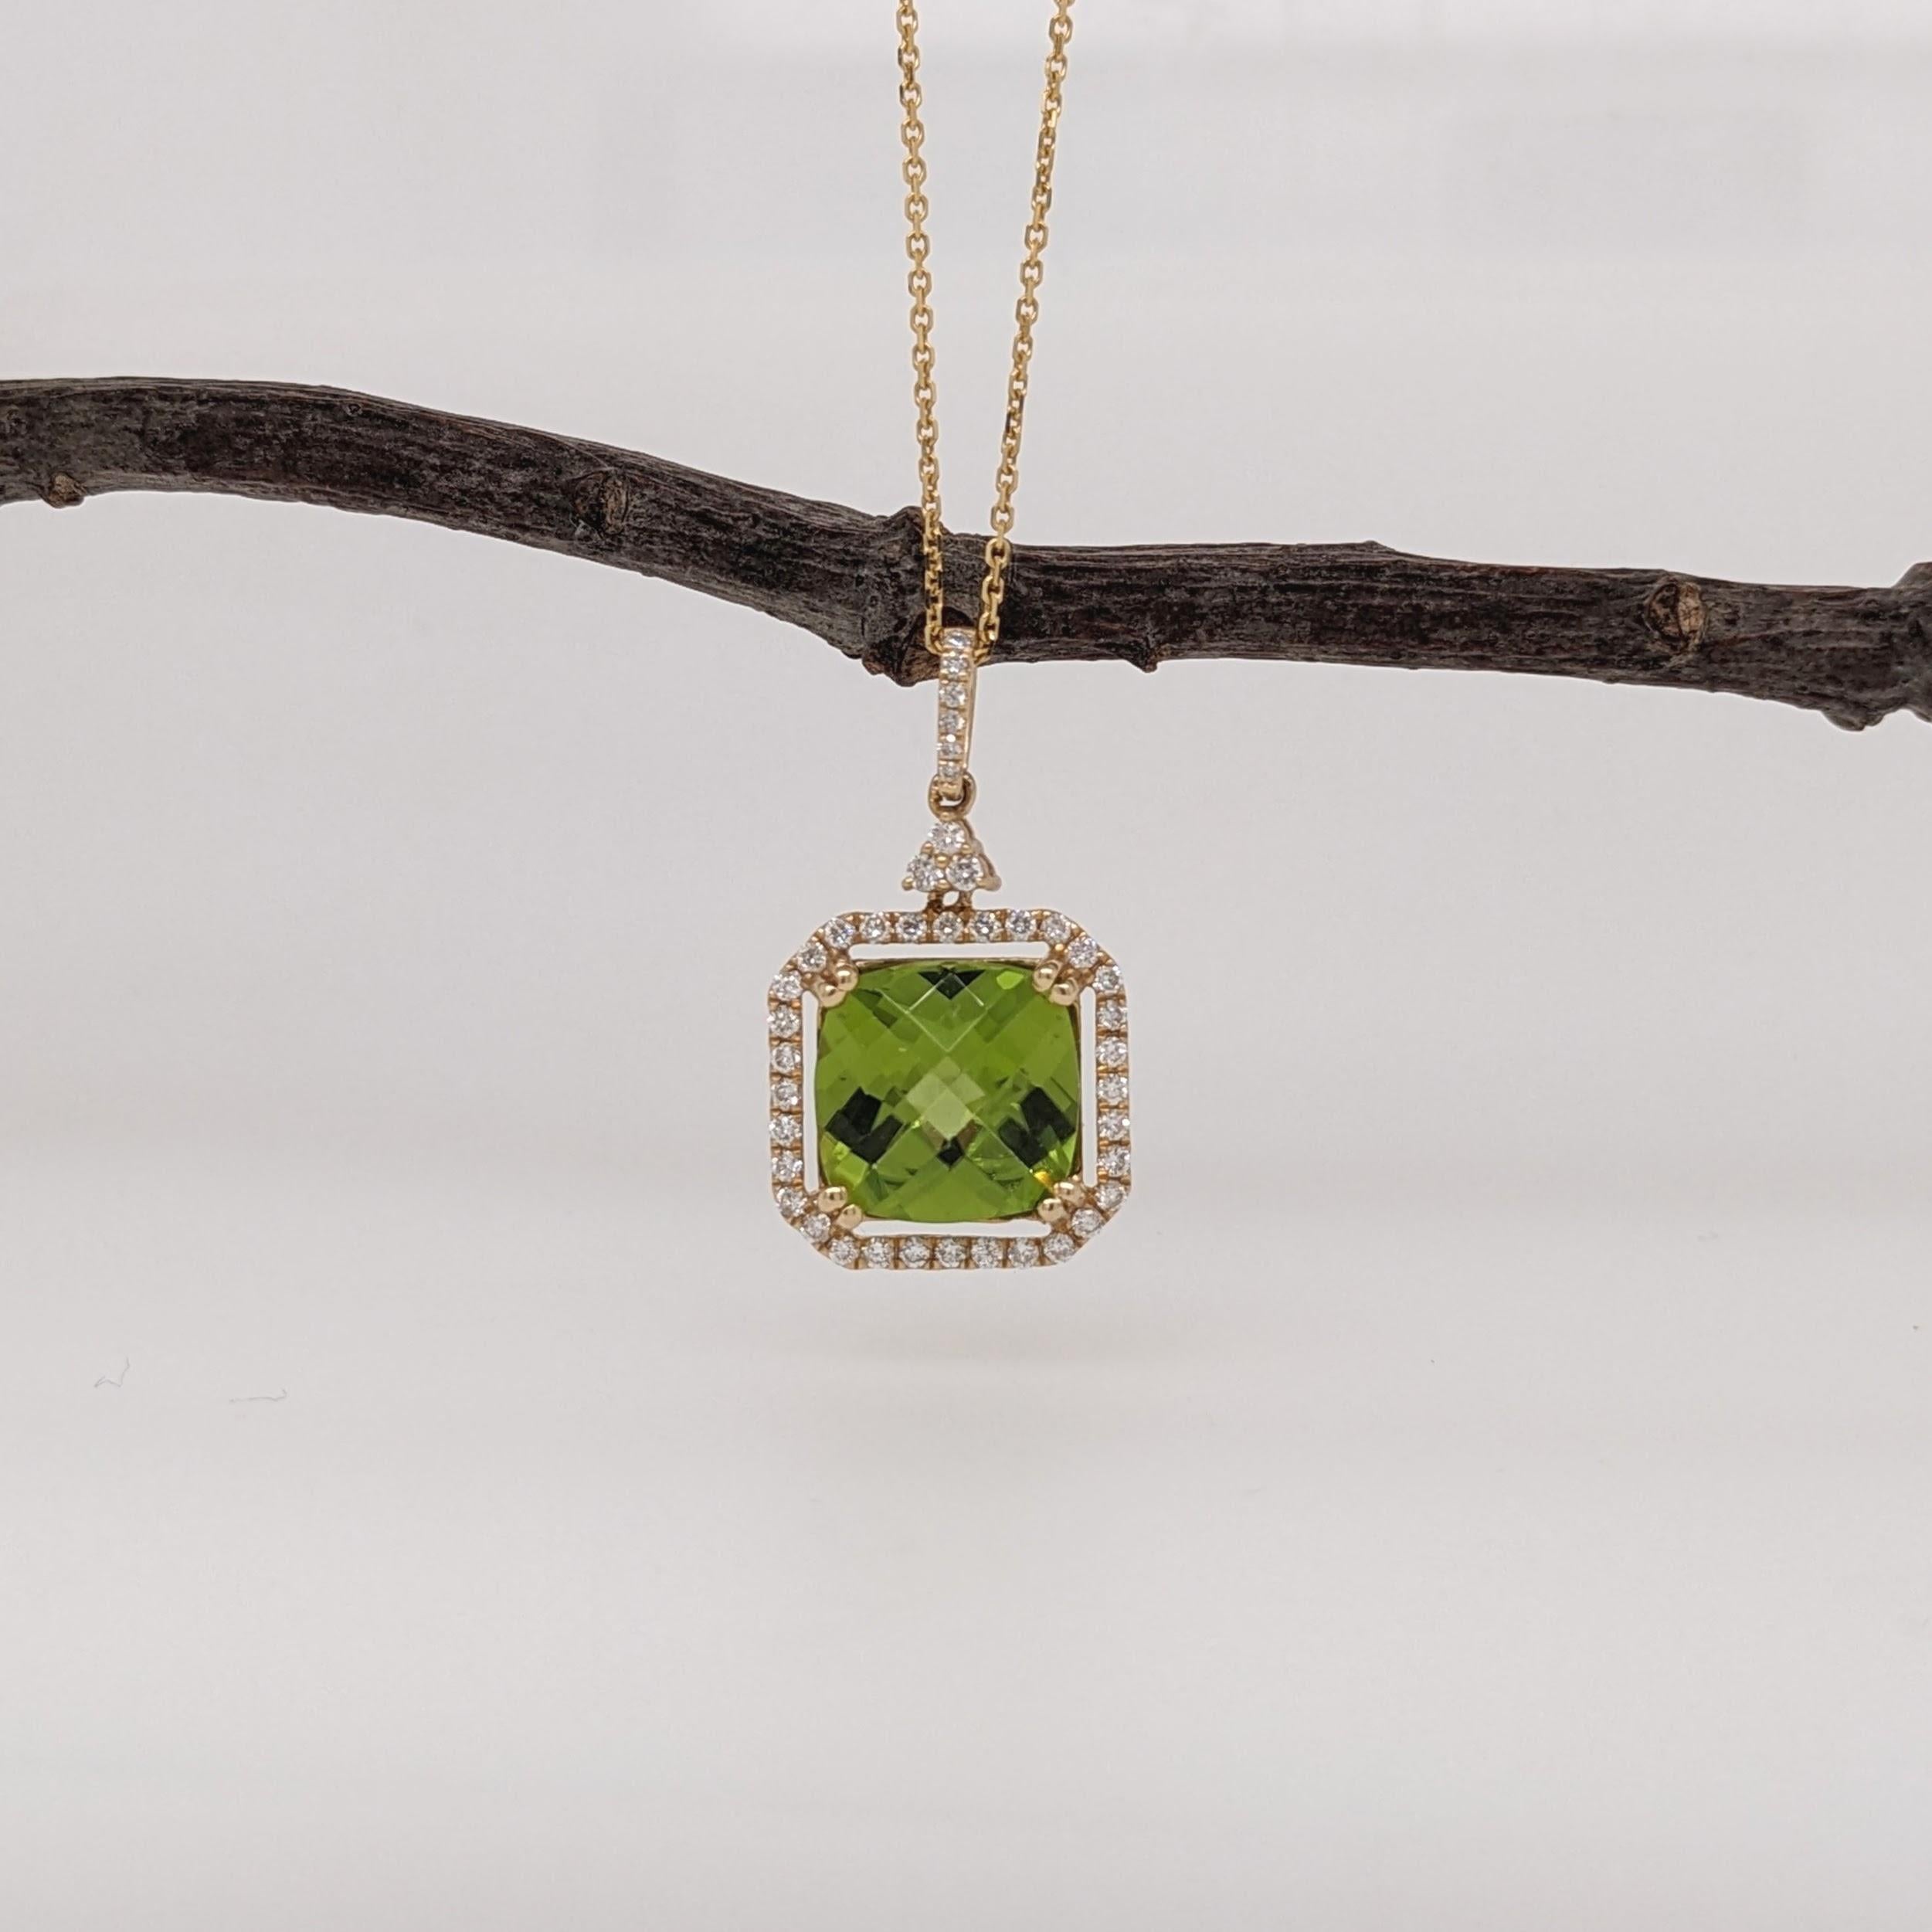 Peridots feature a gorgeous unique shade of vibrant green and beautiful clarity with an amazing sparkle. This pendant makes a stunning statement piece made in 14k gold that will elevate any outfit! Available for purchase with a 16